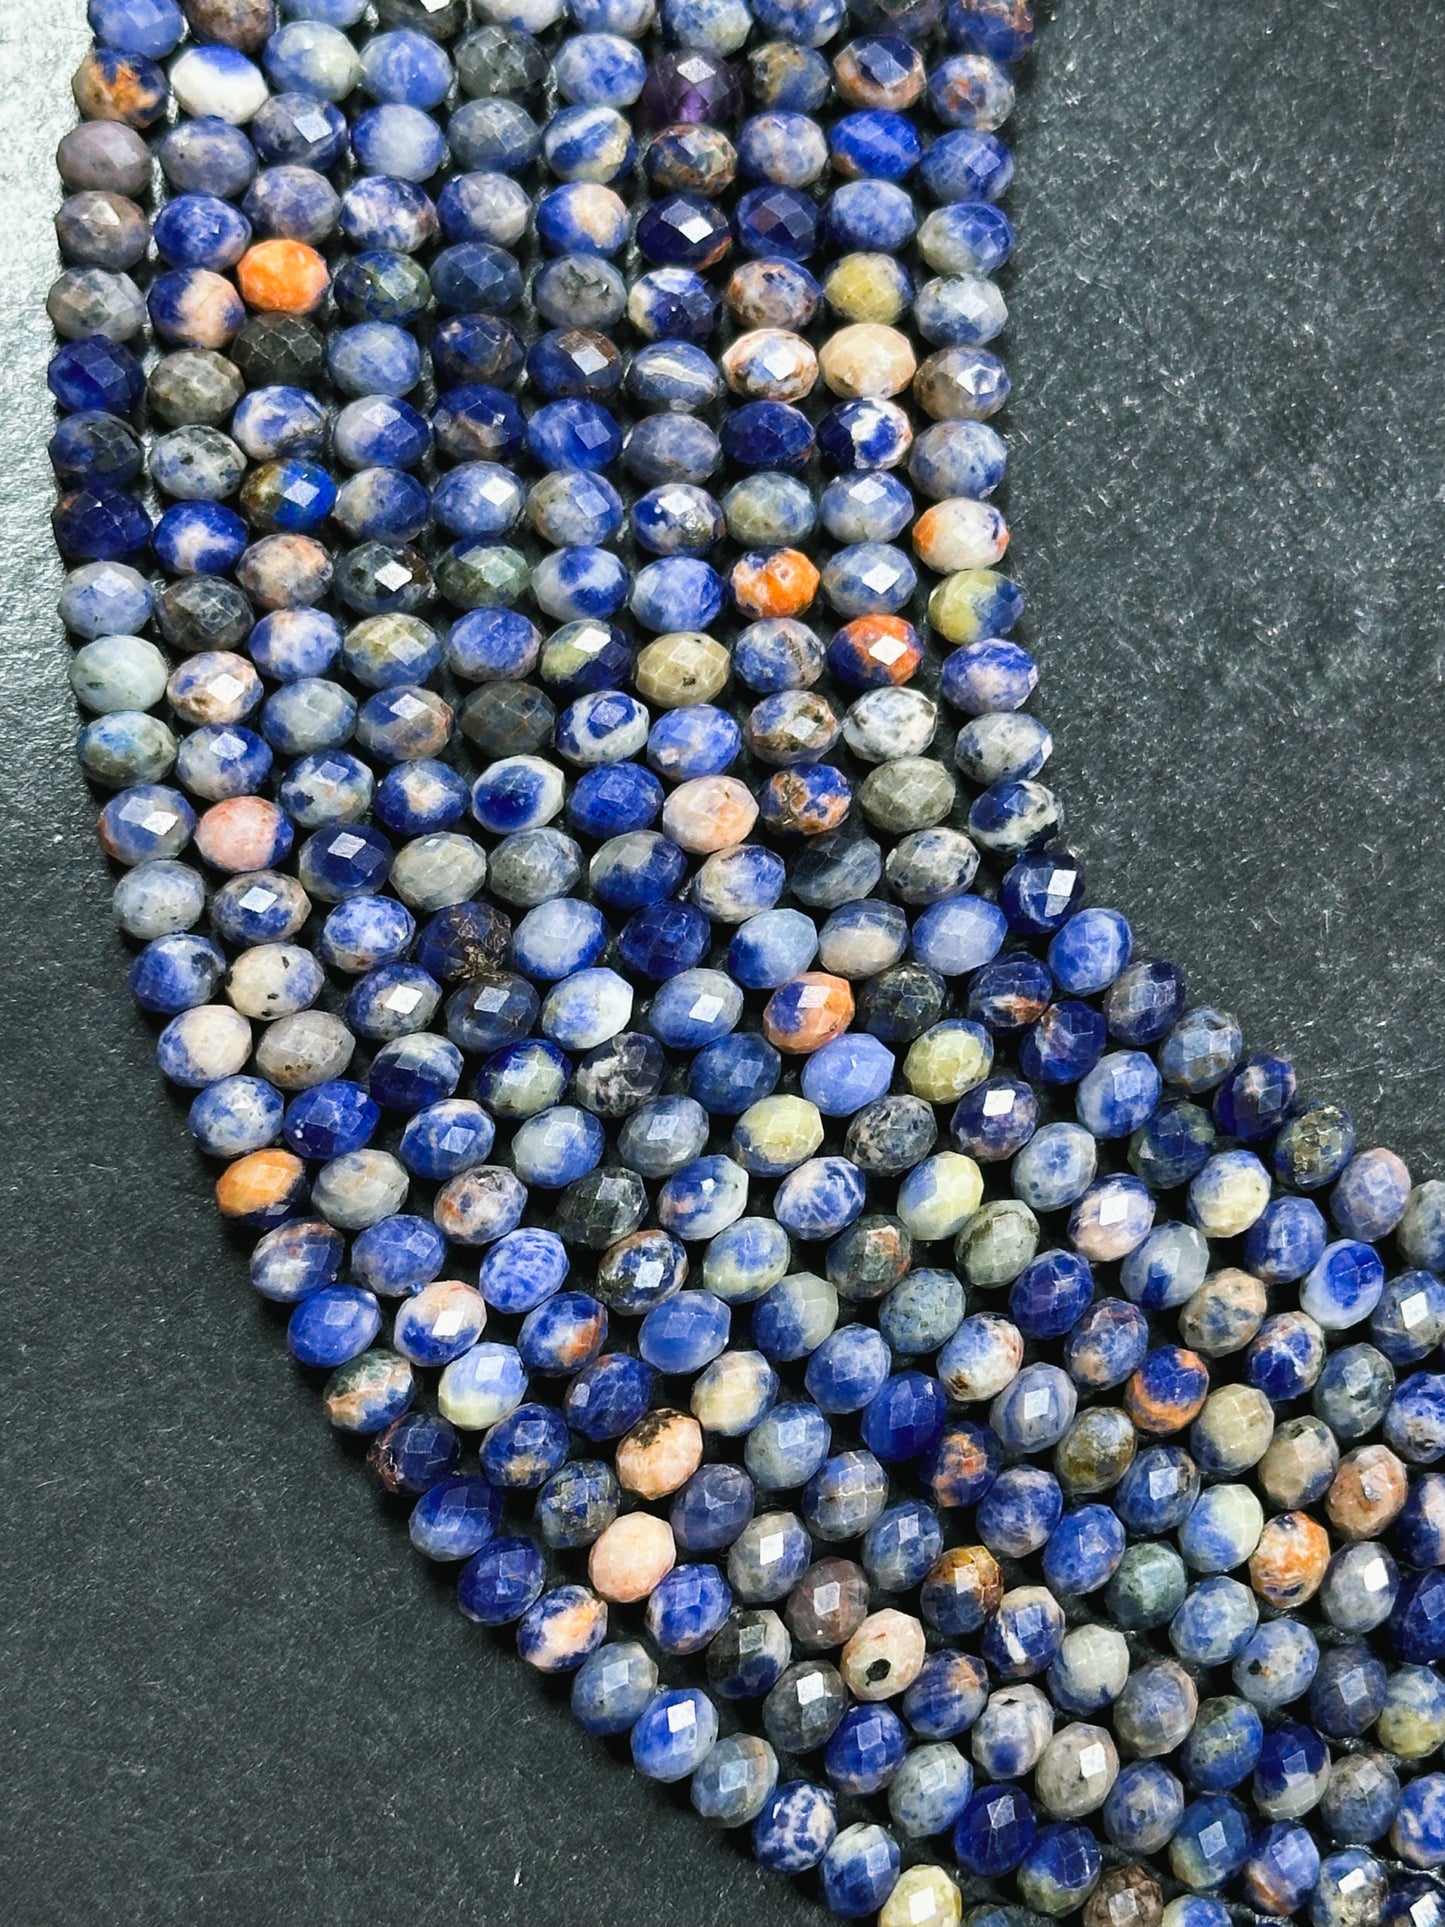 Natural Sunset Sodalite Gemstone Bead Faceted 5x4mm Rondelle Shape Bead, Beautiful Natural Royal Blue White Orange Color Sodalite Bead 15.5"